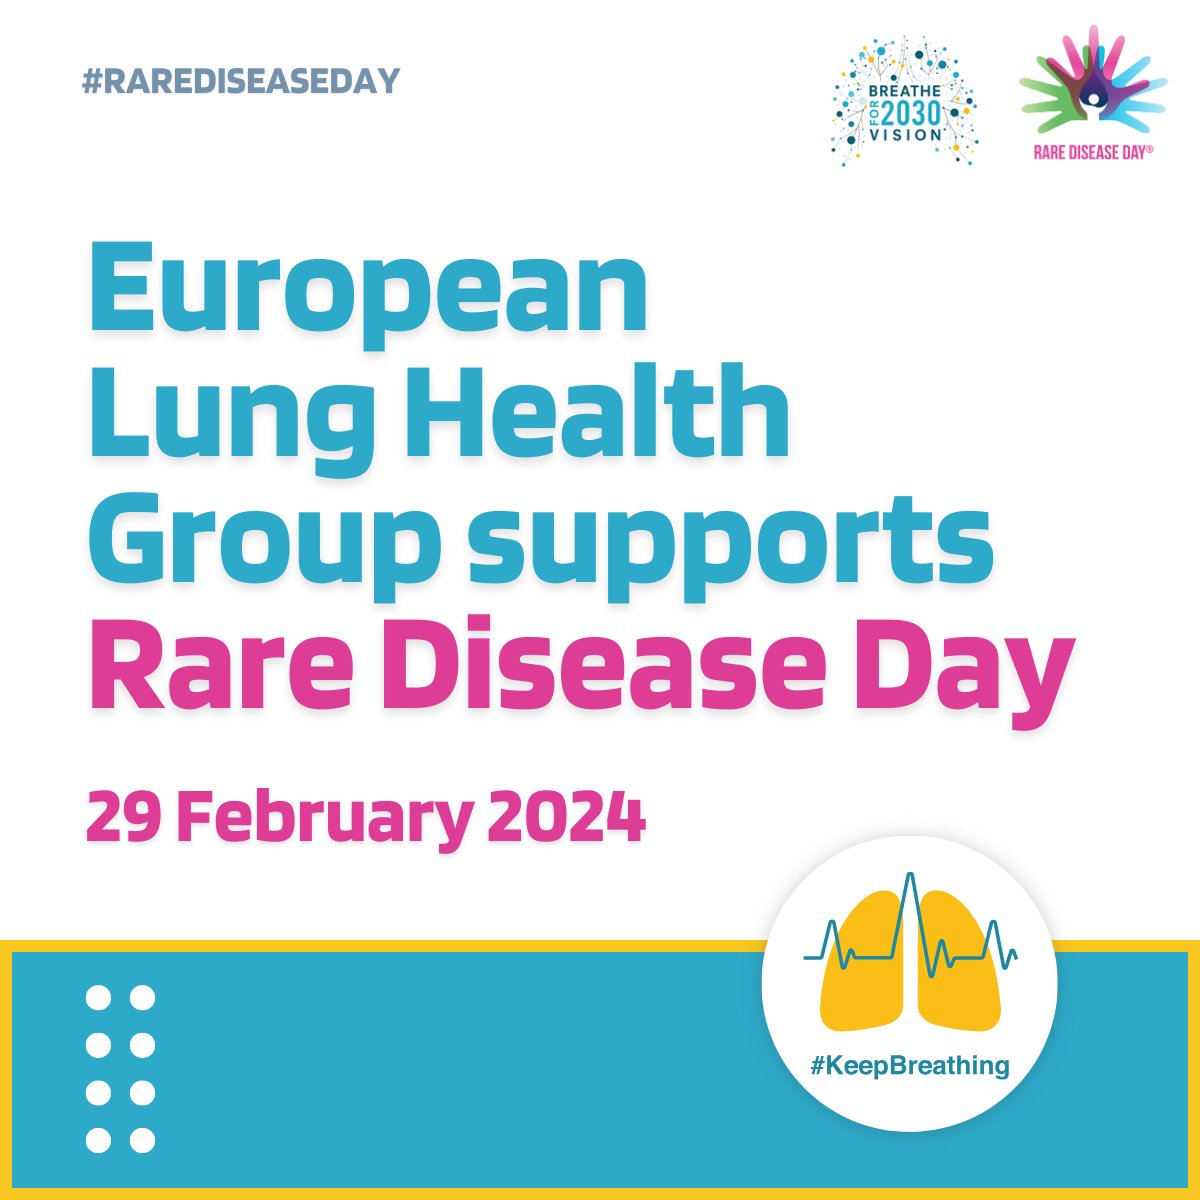 On #RareDiseaseDay, we stand together with rare disease patients and their families!

Over one million people in Europe are affected by a rare #lungdisease.

Action to improve #lunghealth is crucial for those affected to #KeepBreathing ➡️ breathevision.eu

🧵Our advocacy